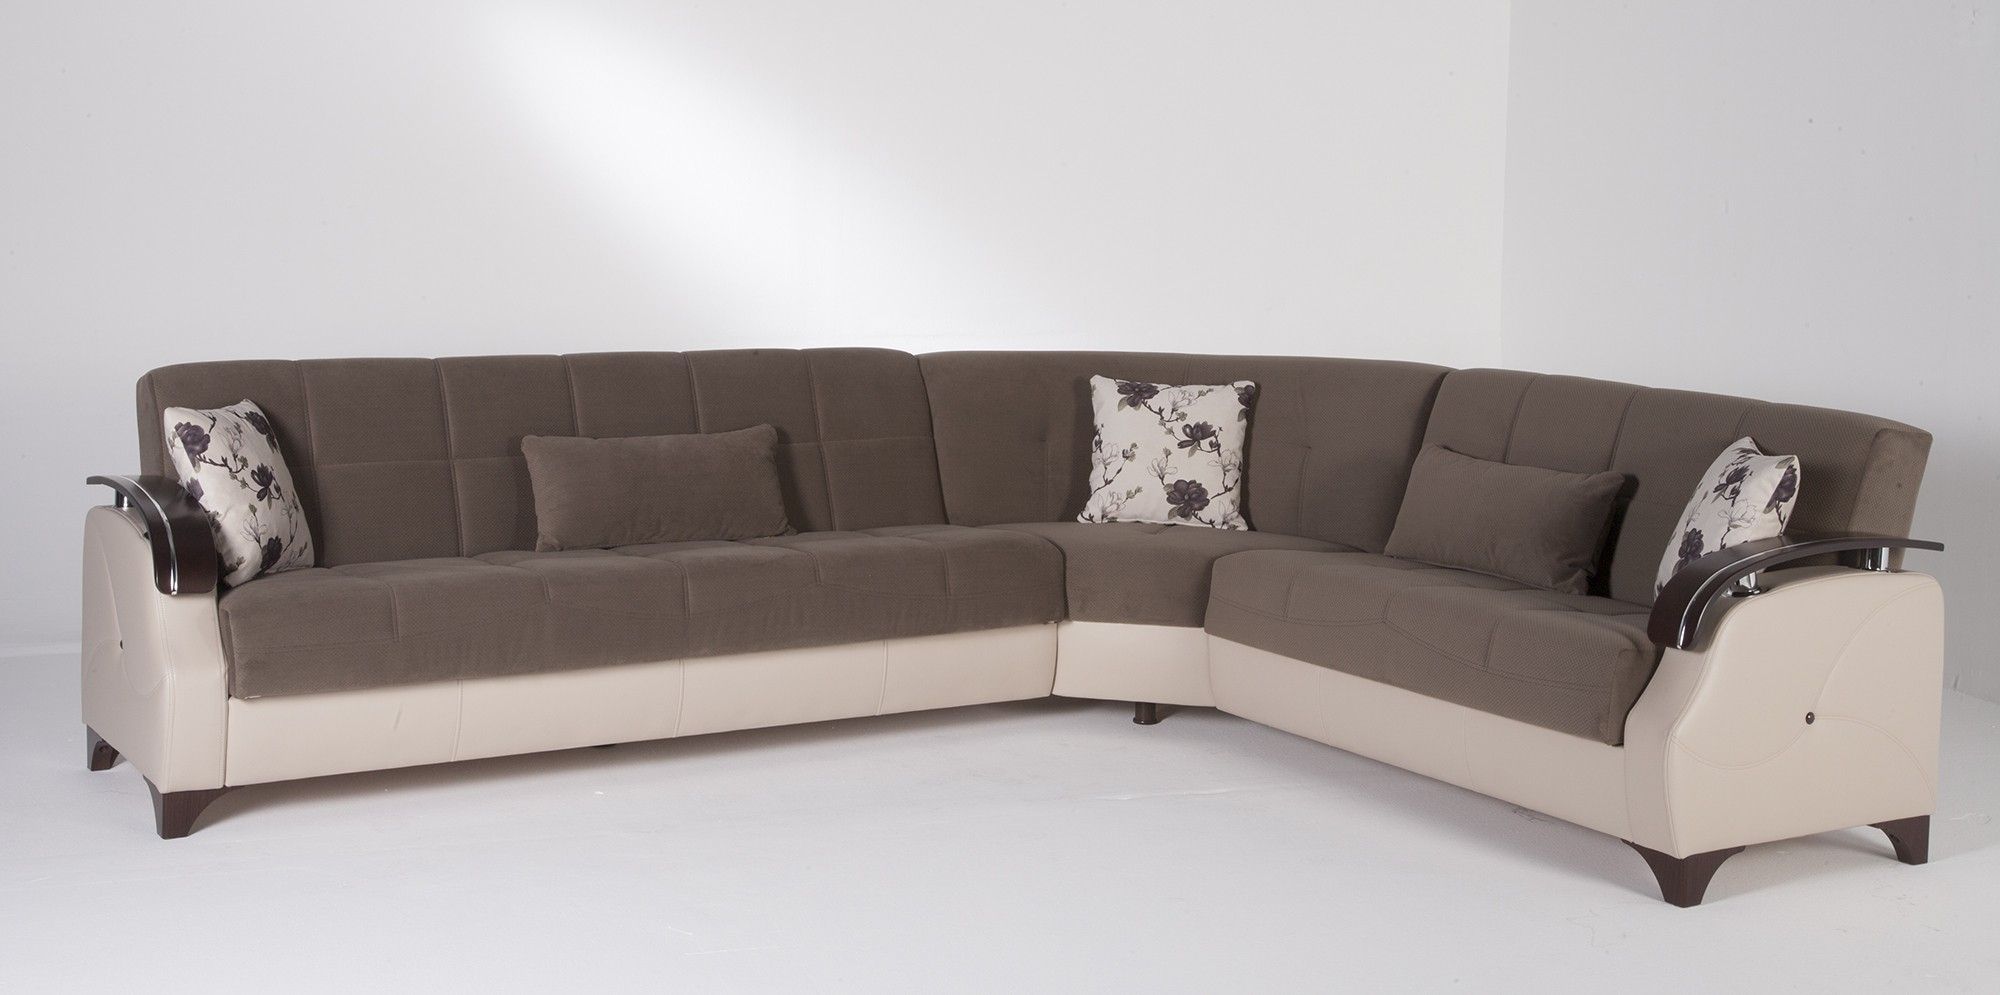 Furniture : Mattress Firm University Fold Out Couch Sleeper Intended For Tuscaloosa Sectional Sofas (Photo 1 of 10)